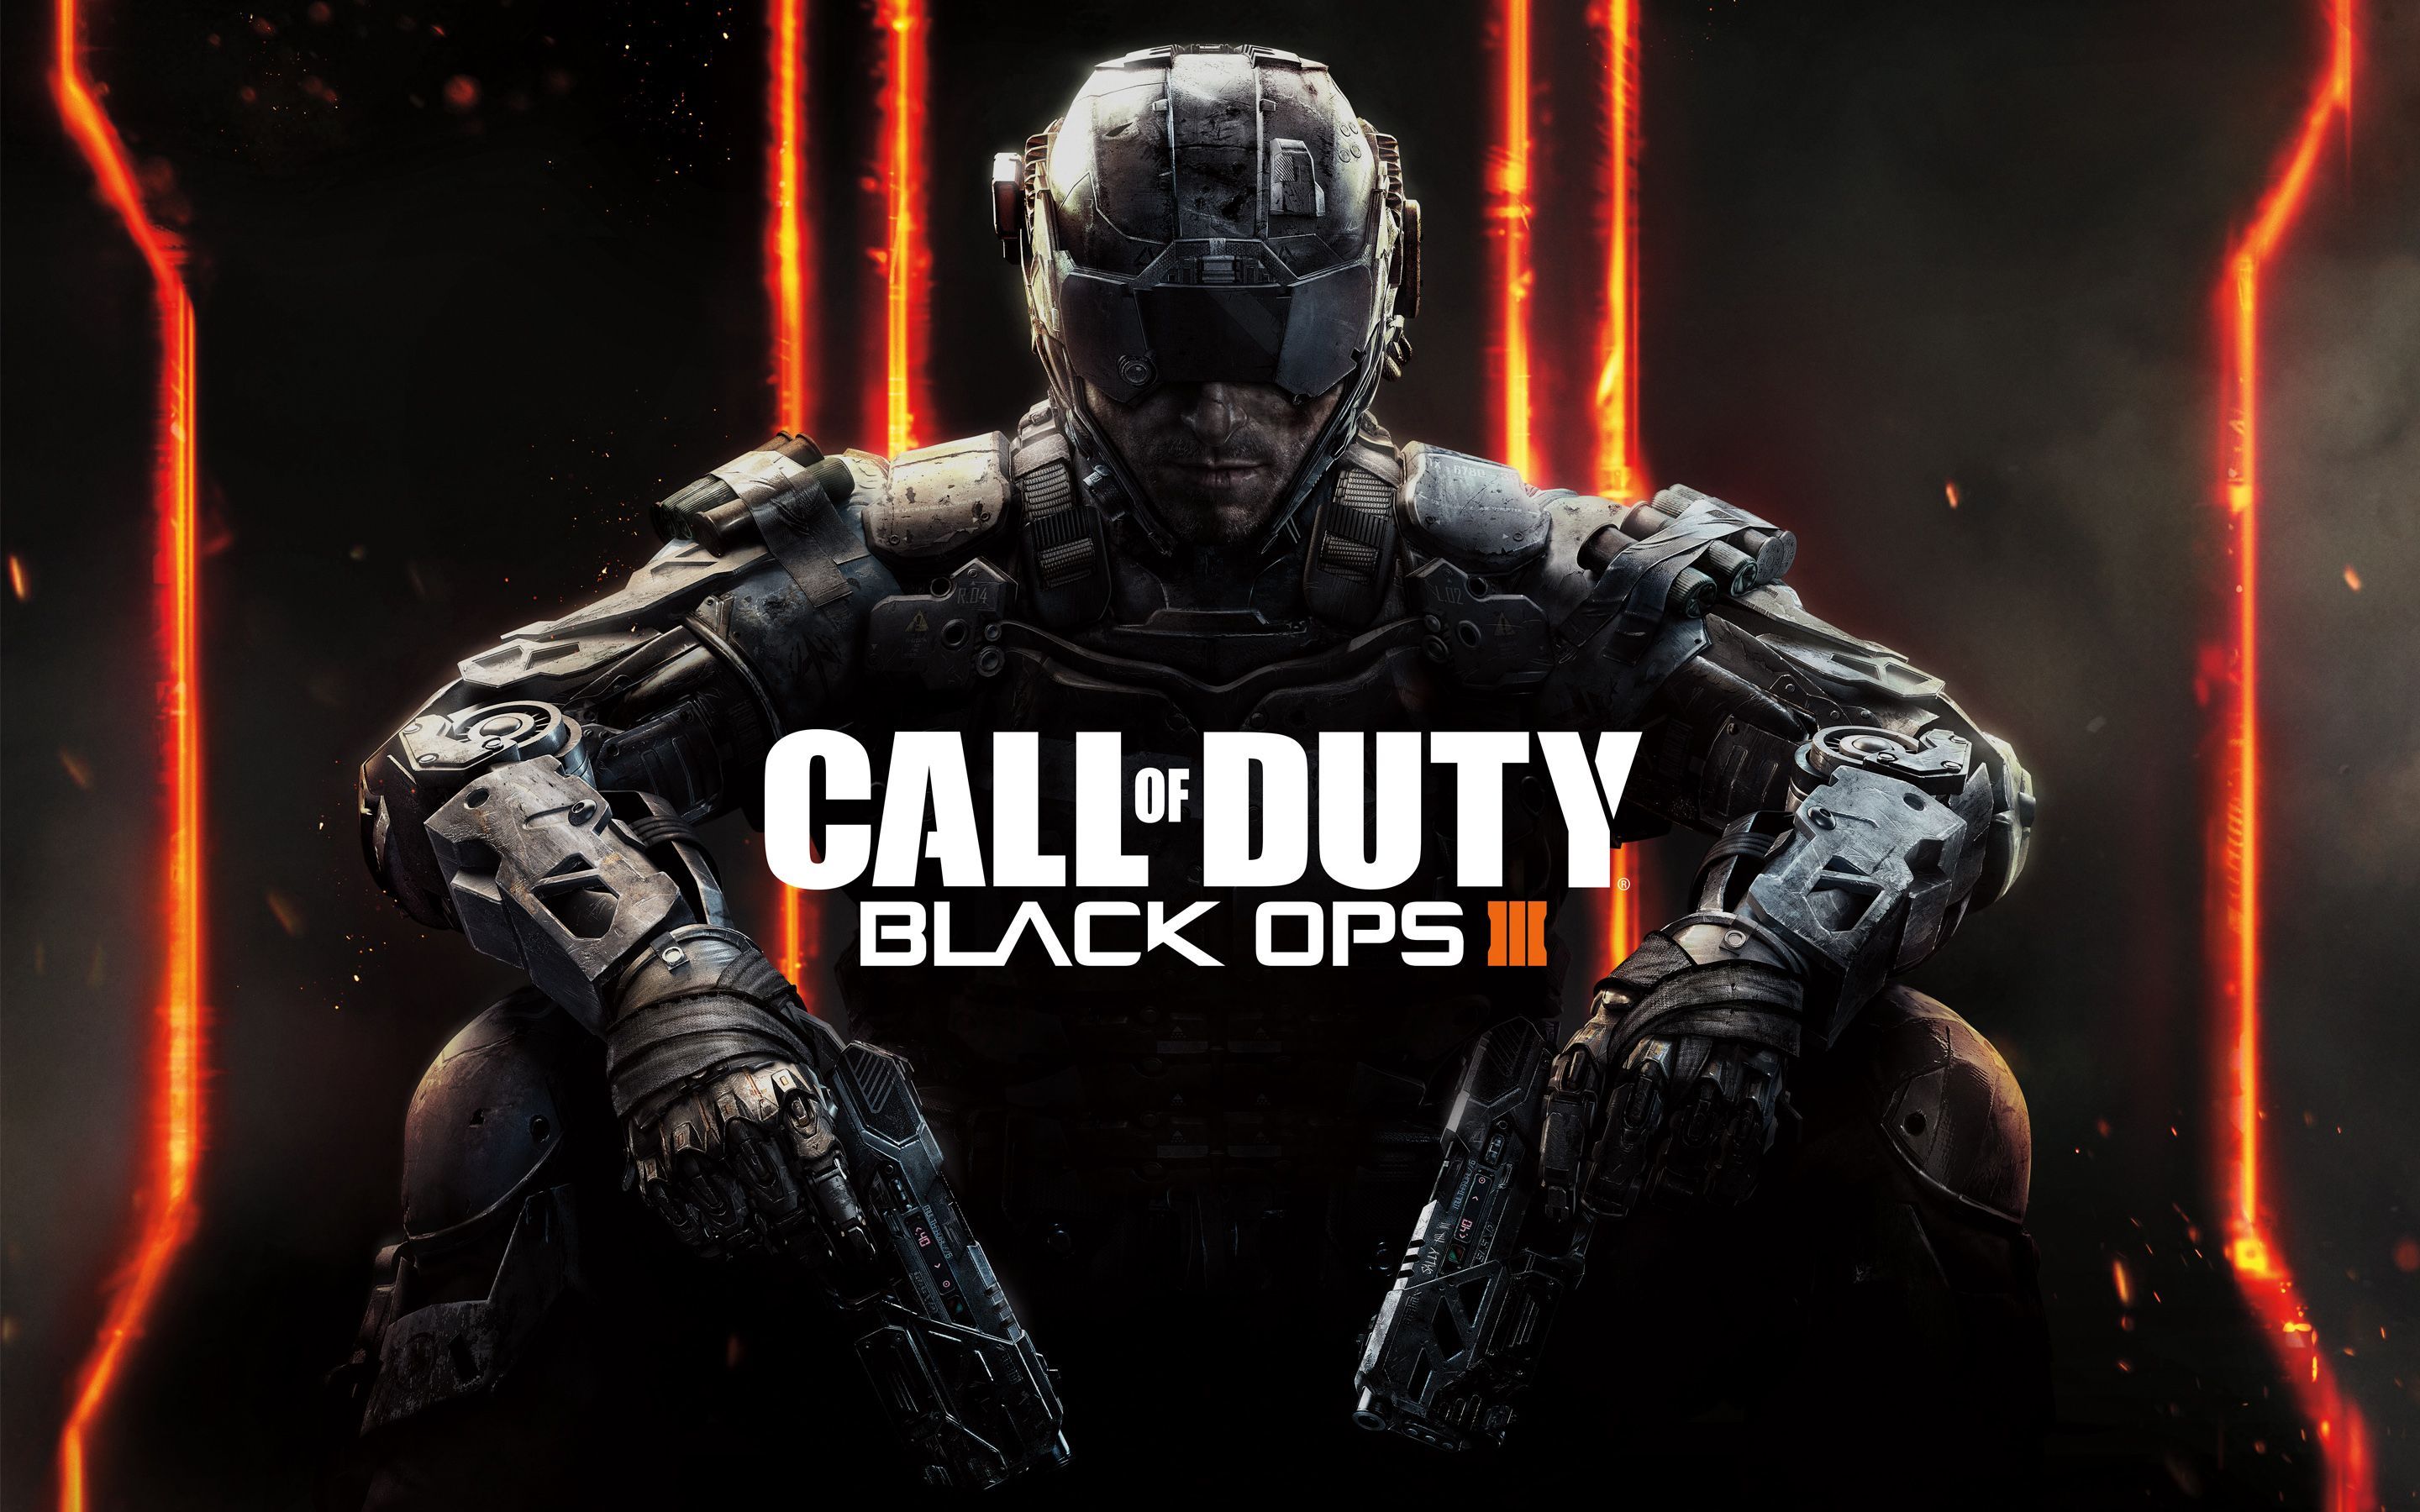 Call of Duty Black Ops III Wallpapers HD Backgrounds